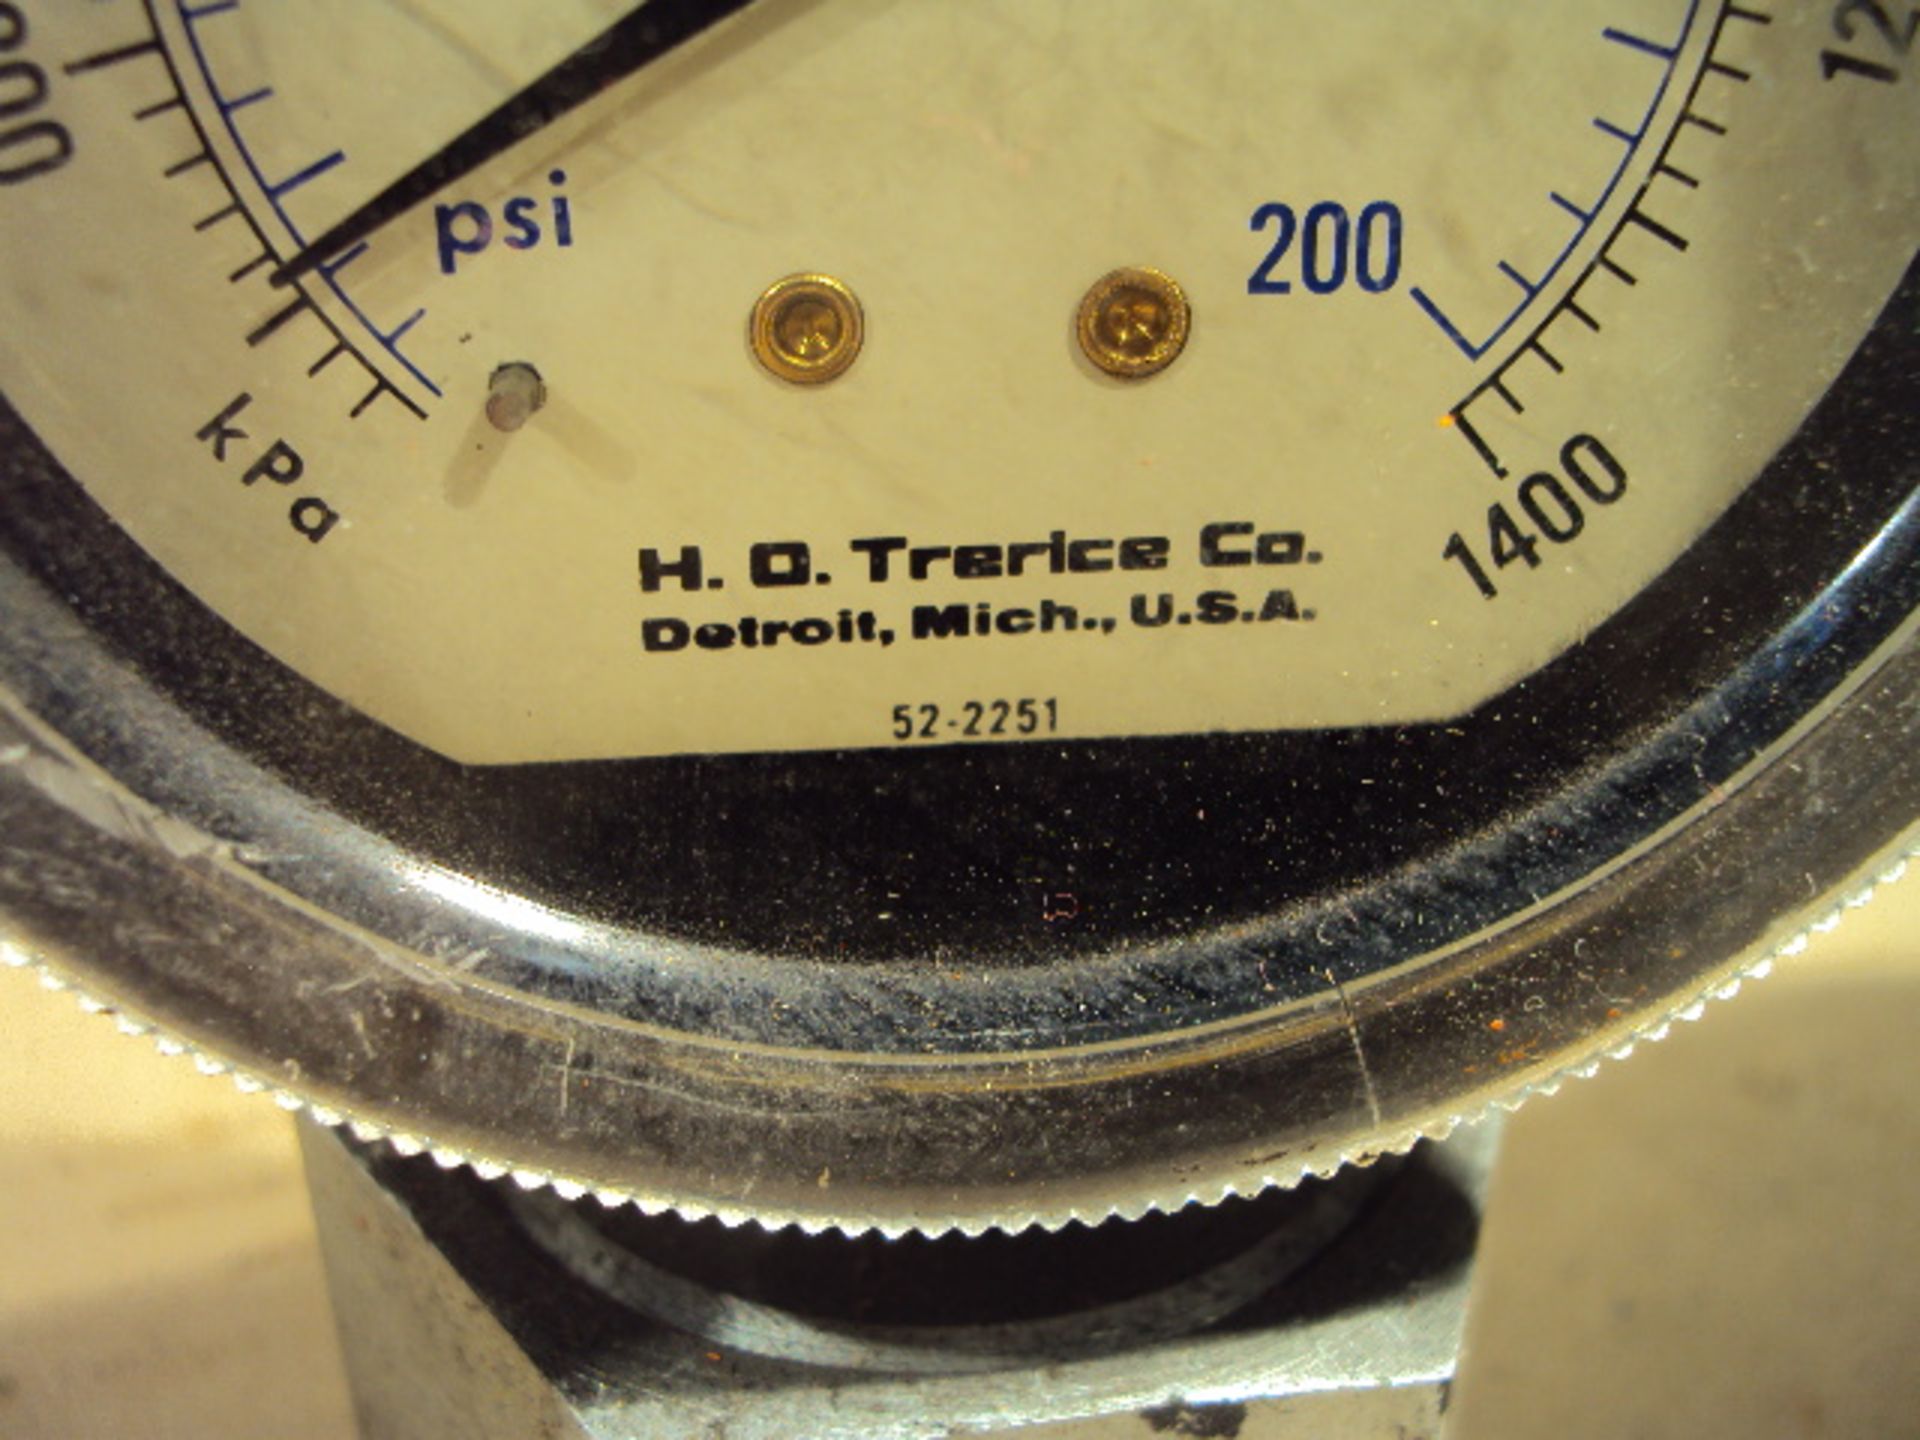 (12) Trerice 52-2251 Oil Filled 0-200 PSI Gages - Image 4 of 4